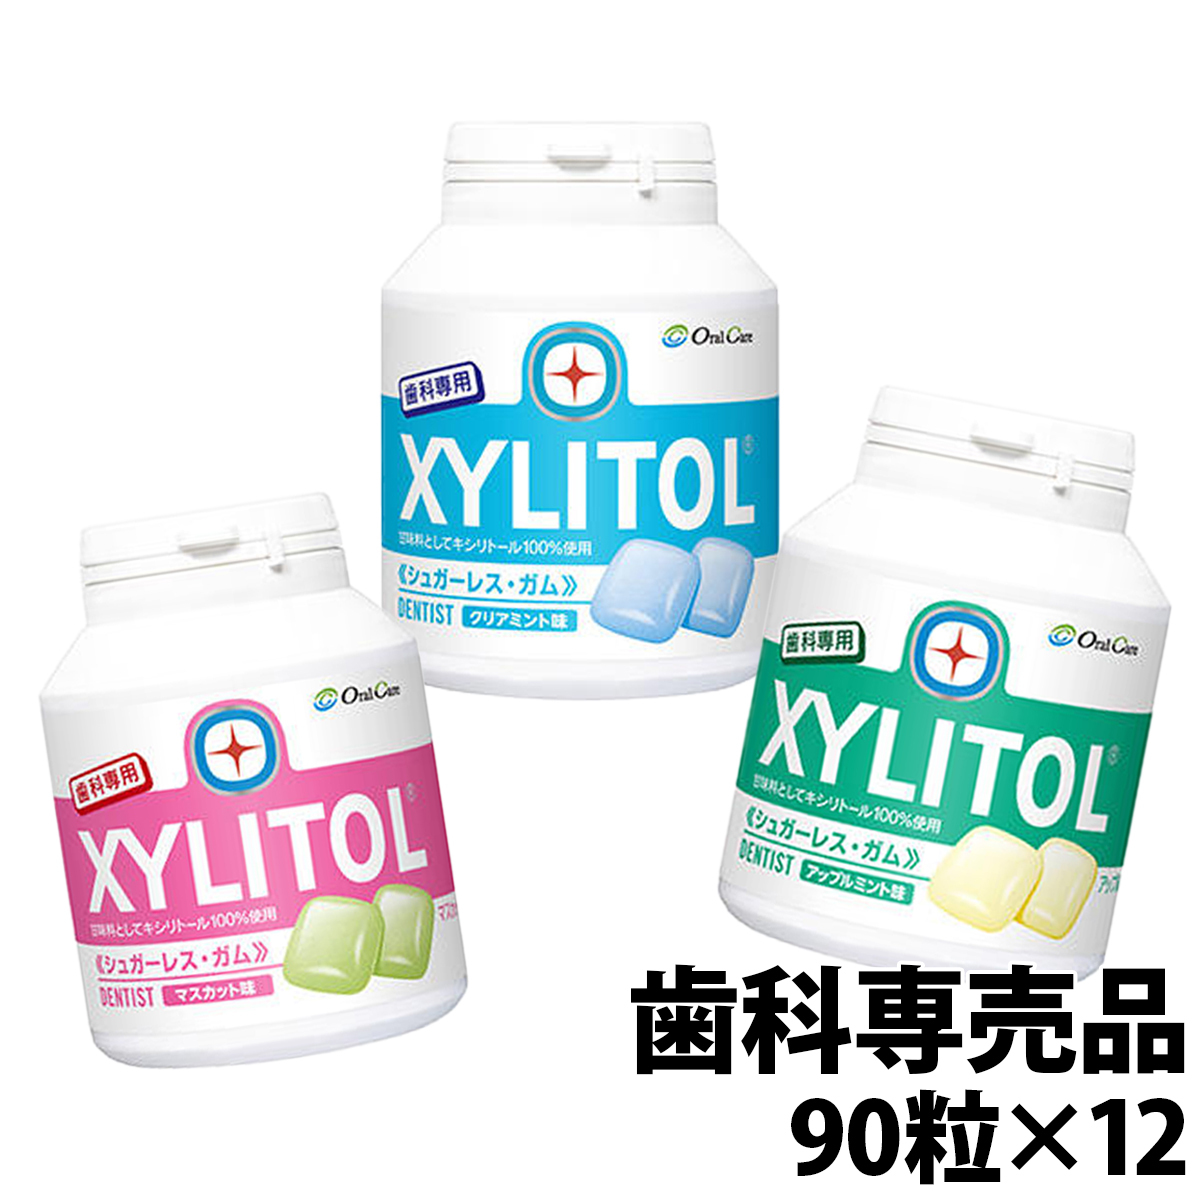  Lotte xylitol gum bottle type 90 bead ×1 2 ps courier service carriage free xylitol 100% tooth ...